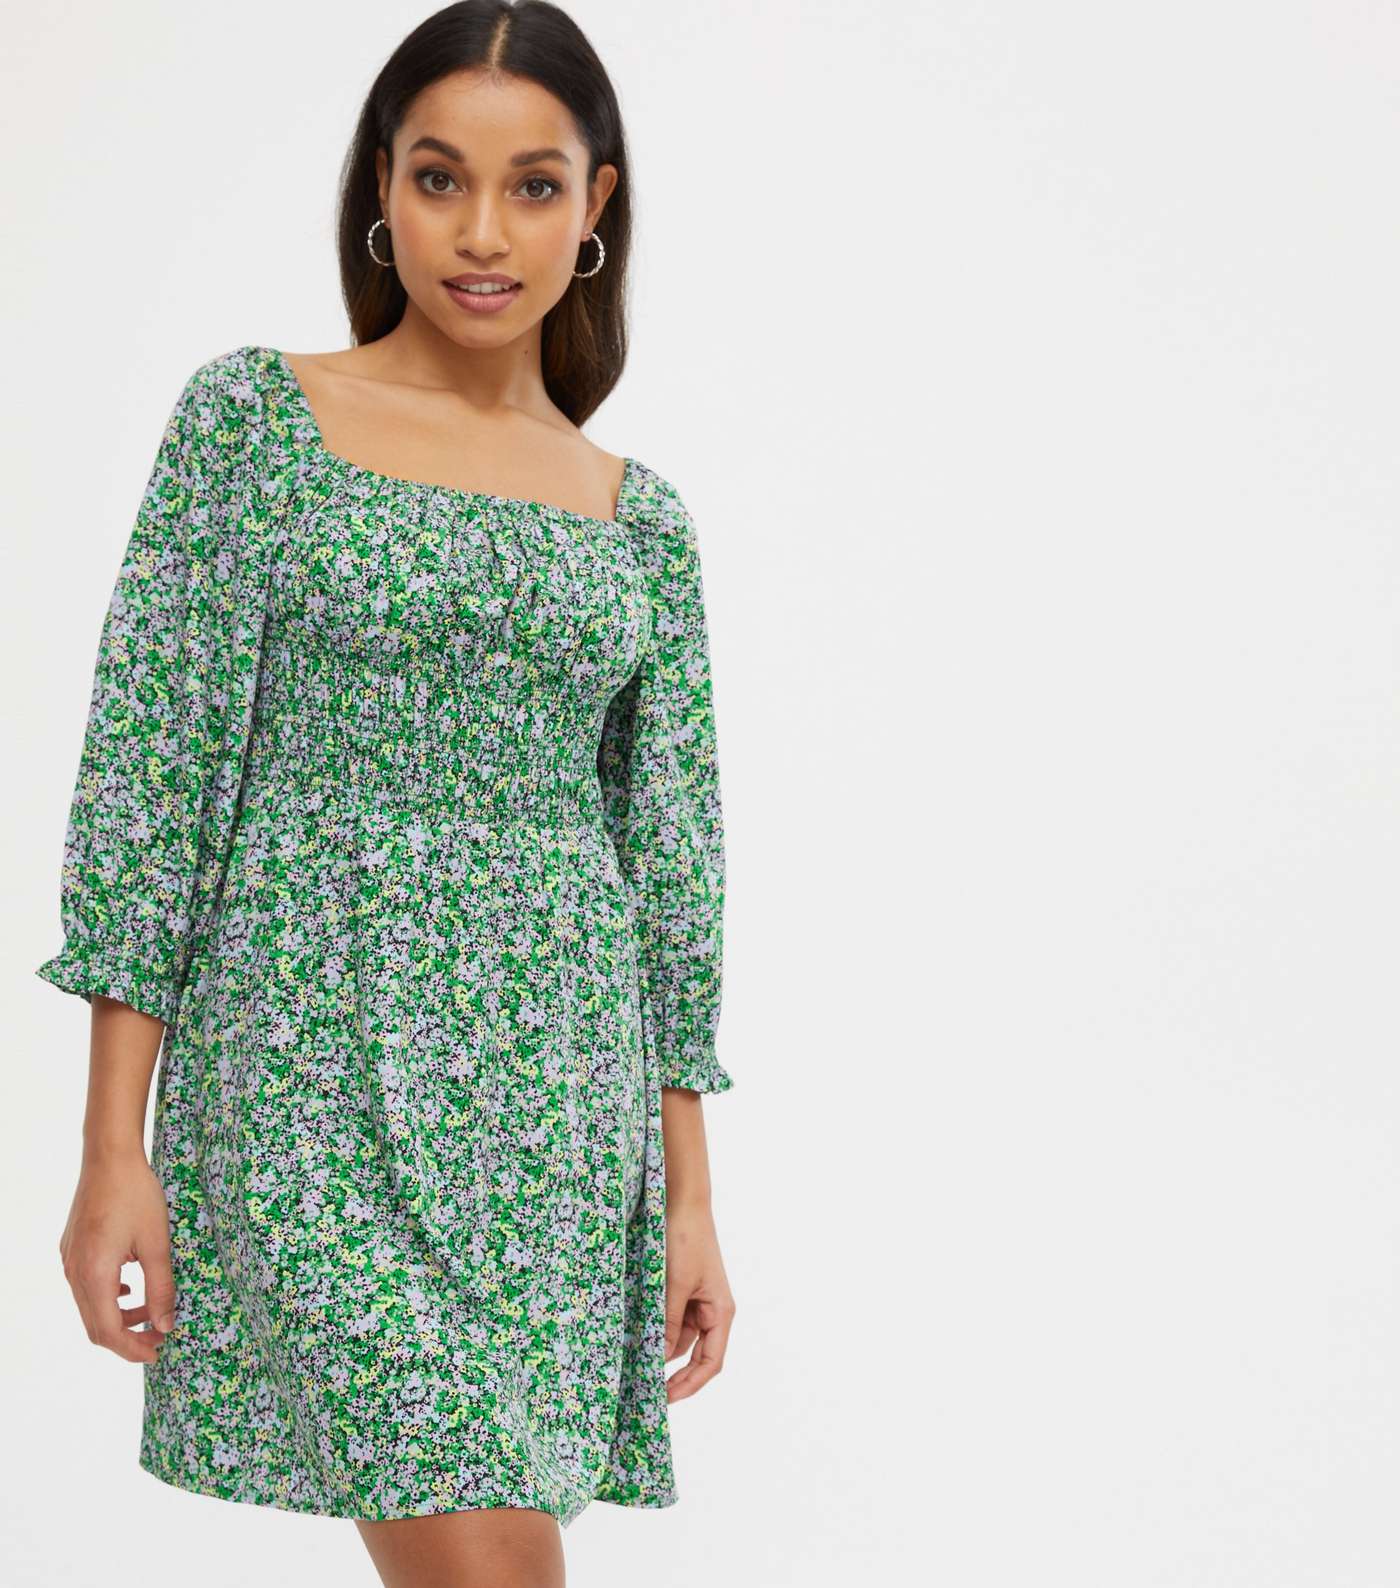 Petite Green Floral Square Neck Shirred Dress